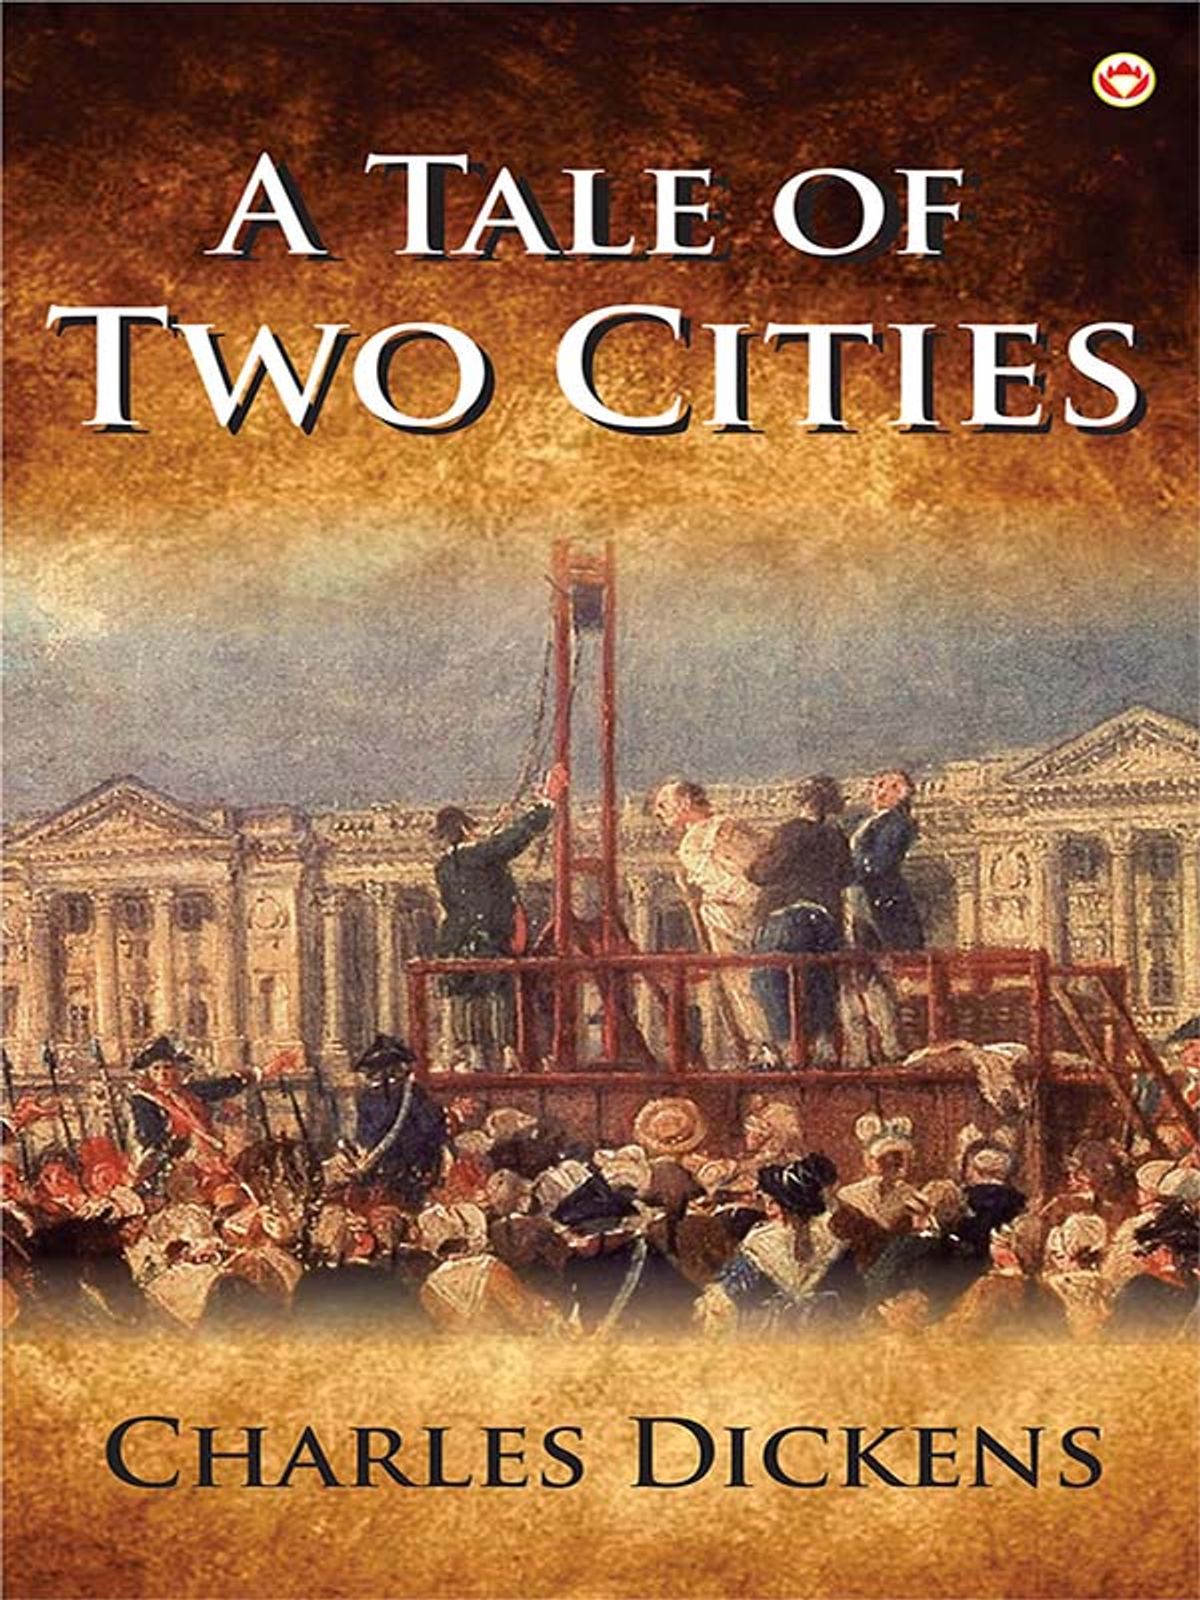 a tale of two cities essay questions and answers